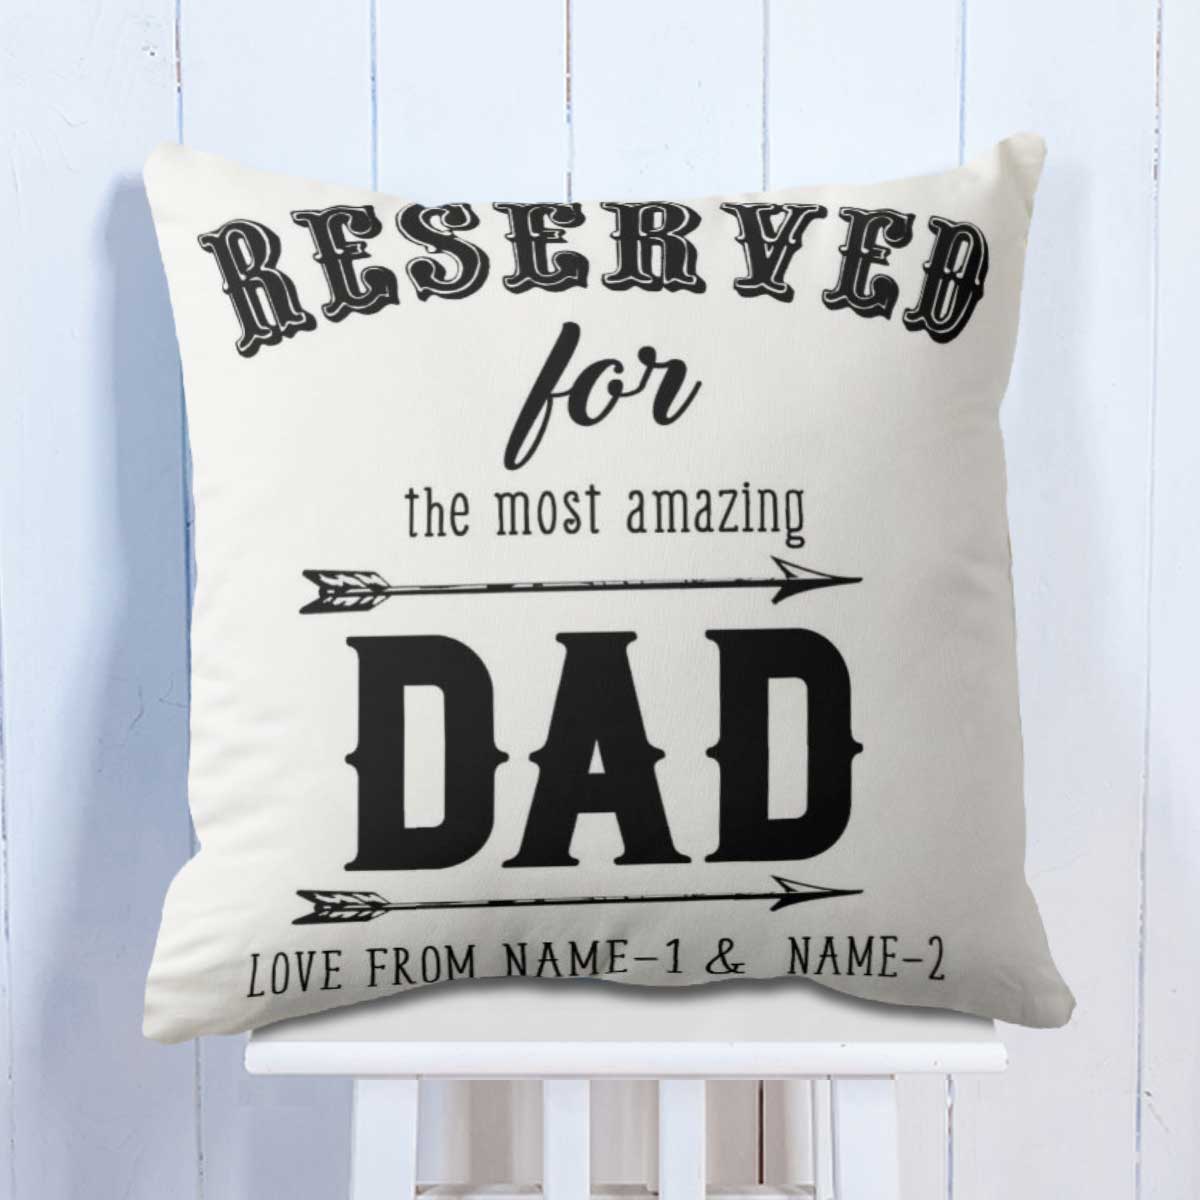 Father's Day Gifts | Gifts for Fathers Day Online 2021 - Rakhi.com